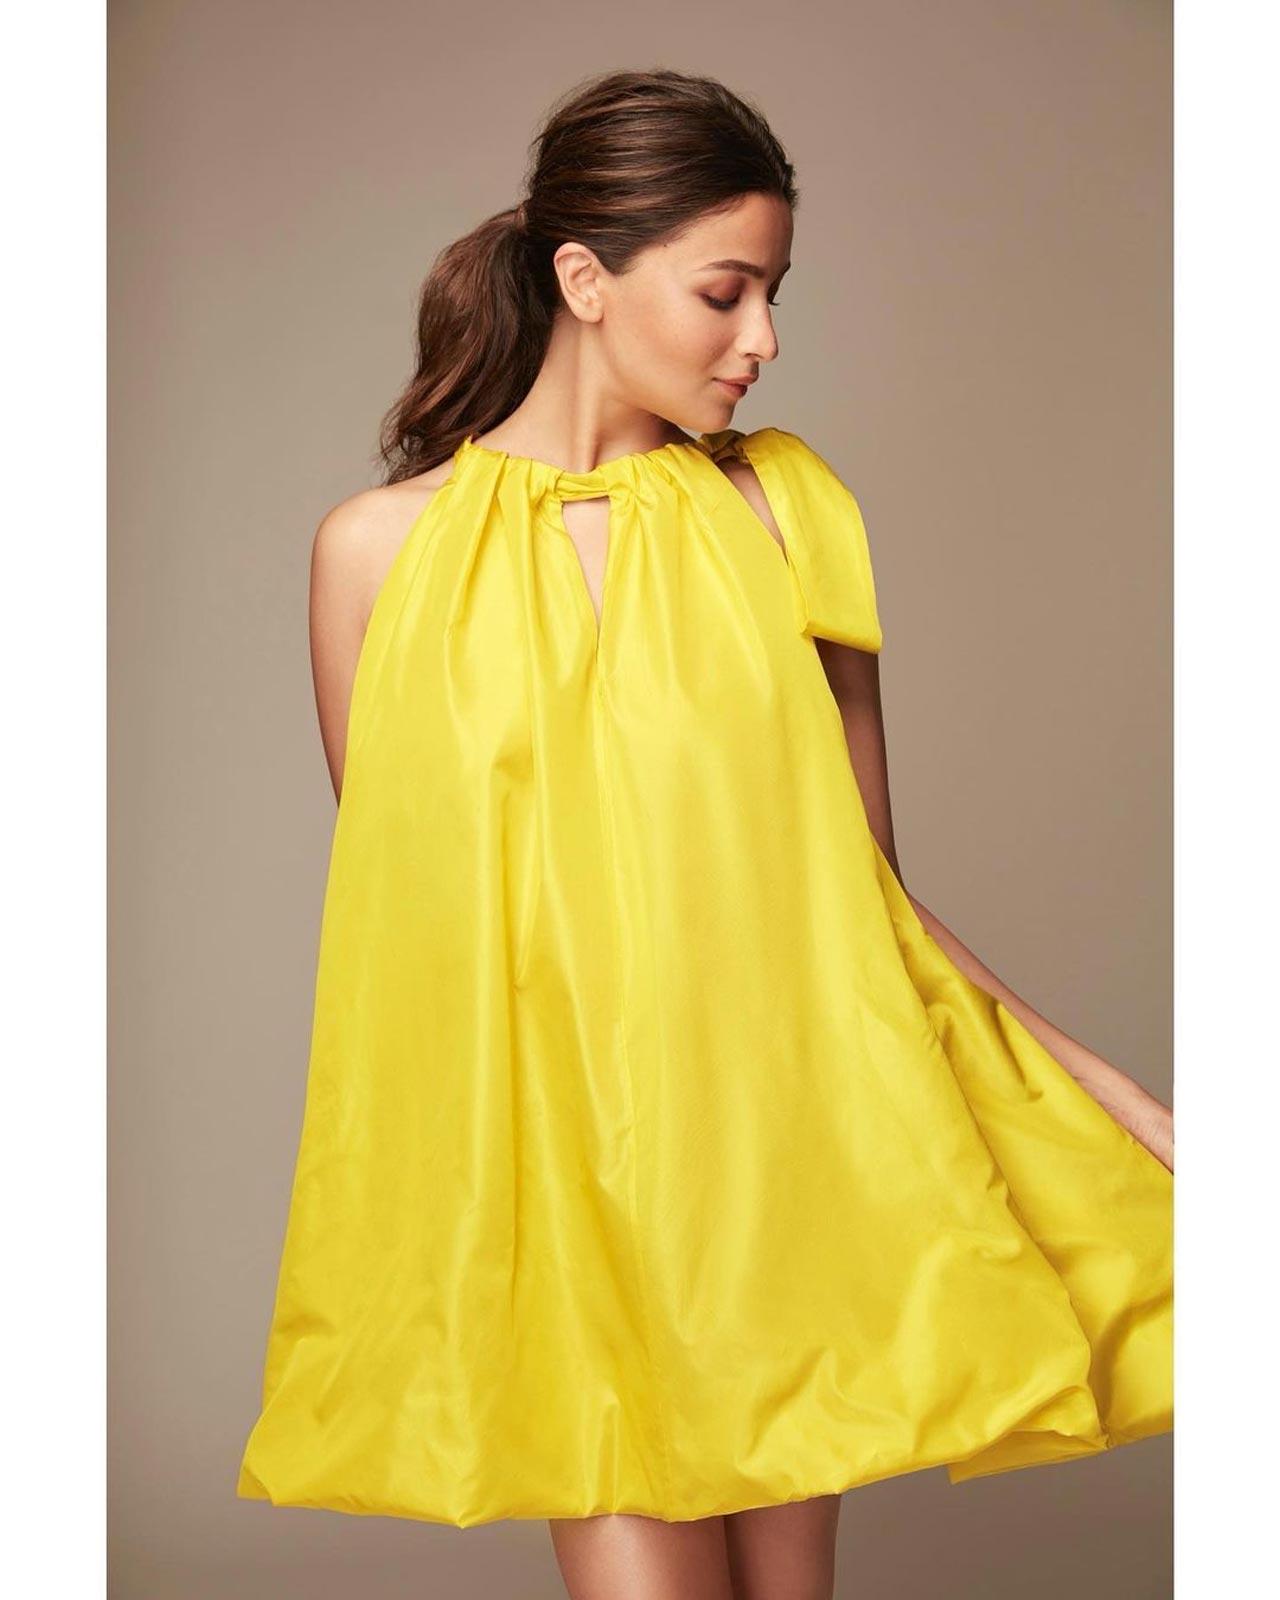 Alia Bhatt makes a strong case for maternity fashion as the halter neck A-line dress perfectly hides her baby bump and the colour made her pregnancy glow unmissable